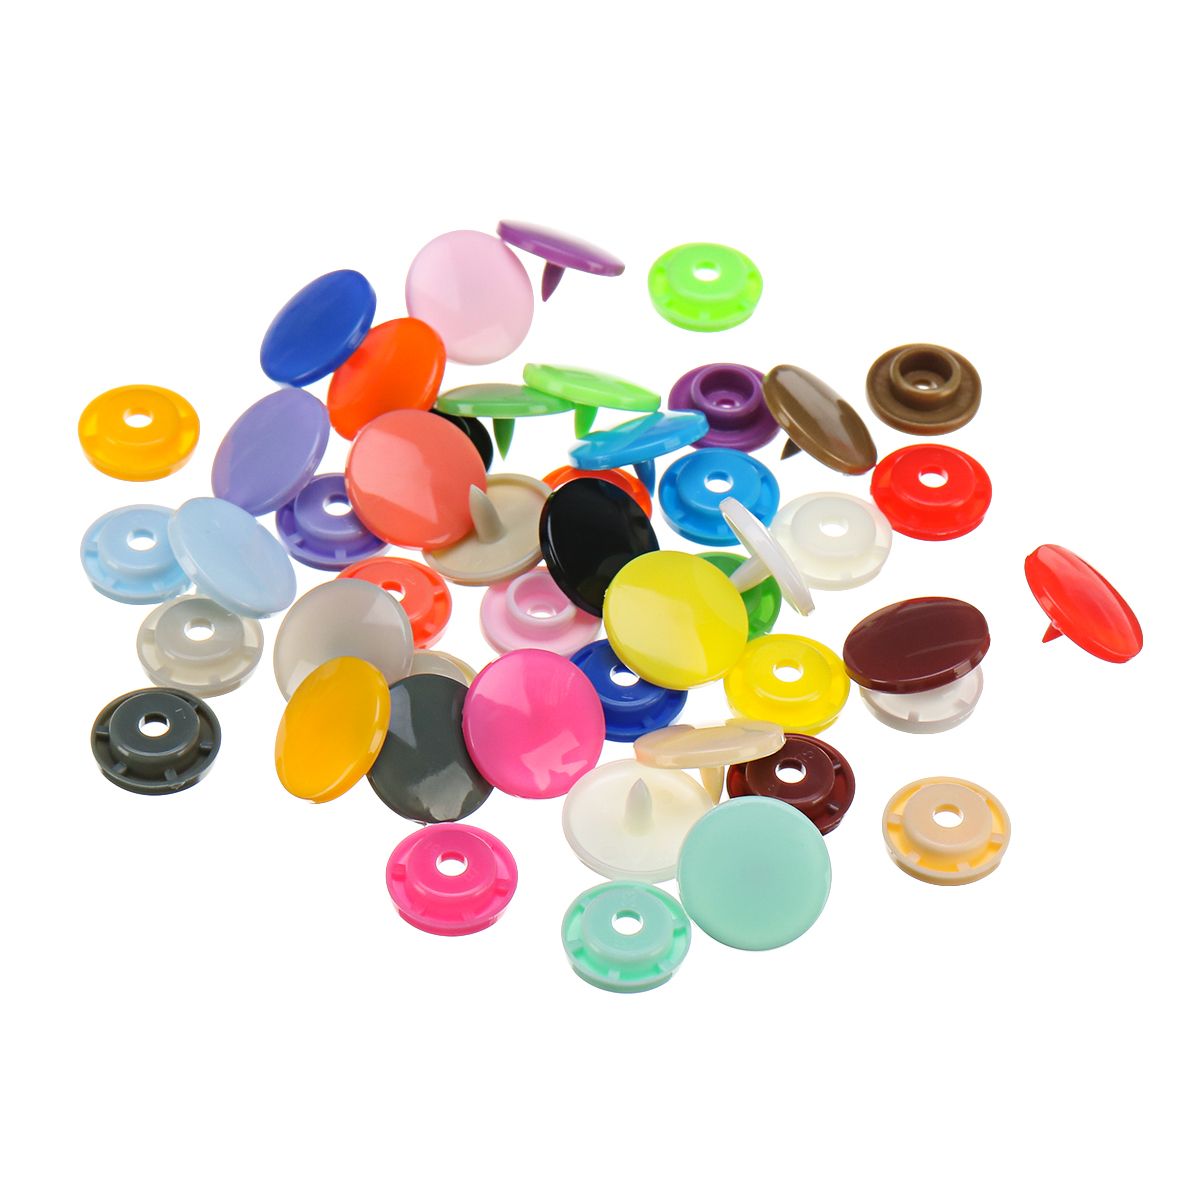 360-SetLot-24-Color-T5-Resin-Snap-Plastic-Buttons-Installation-Tools-Sihetun-Buckle-1420003